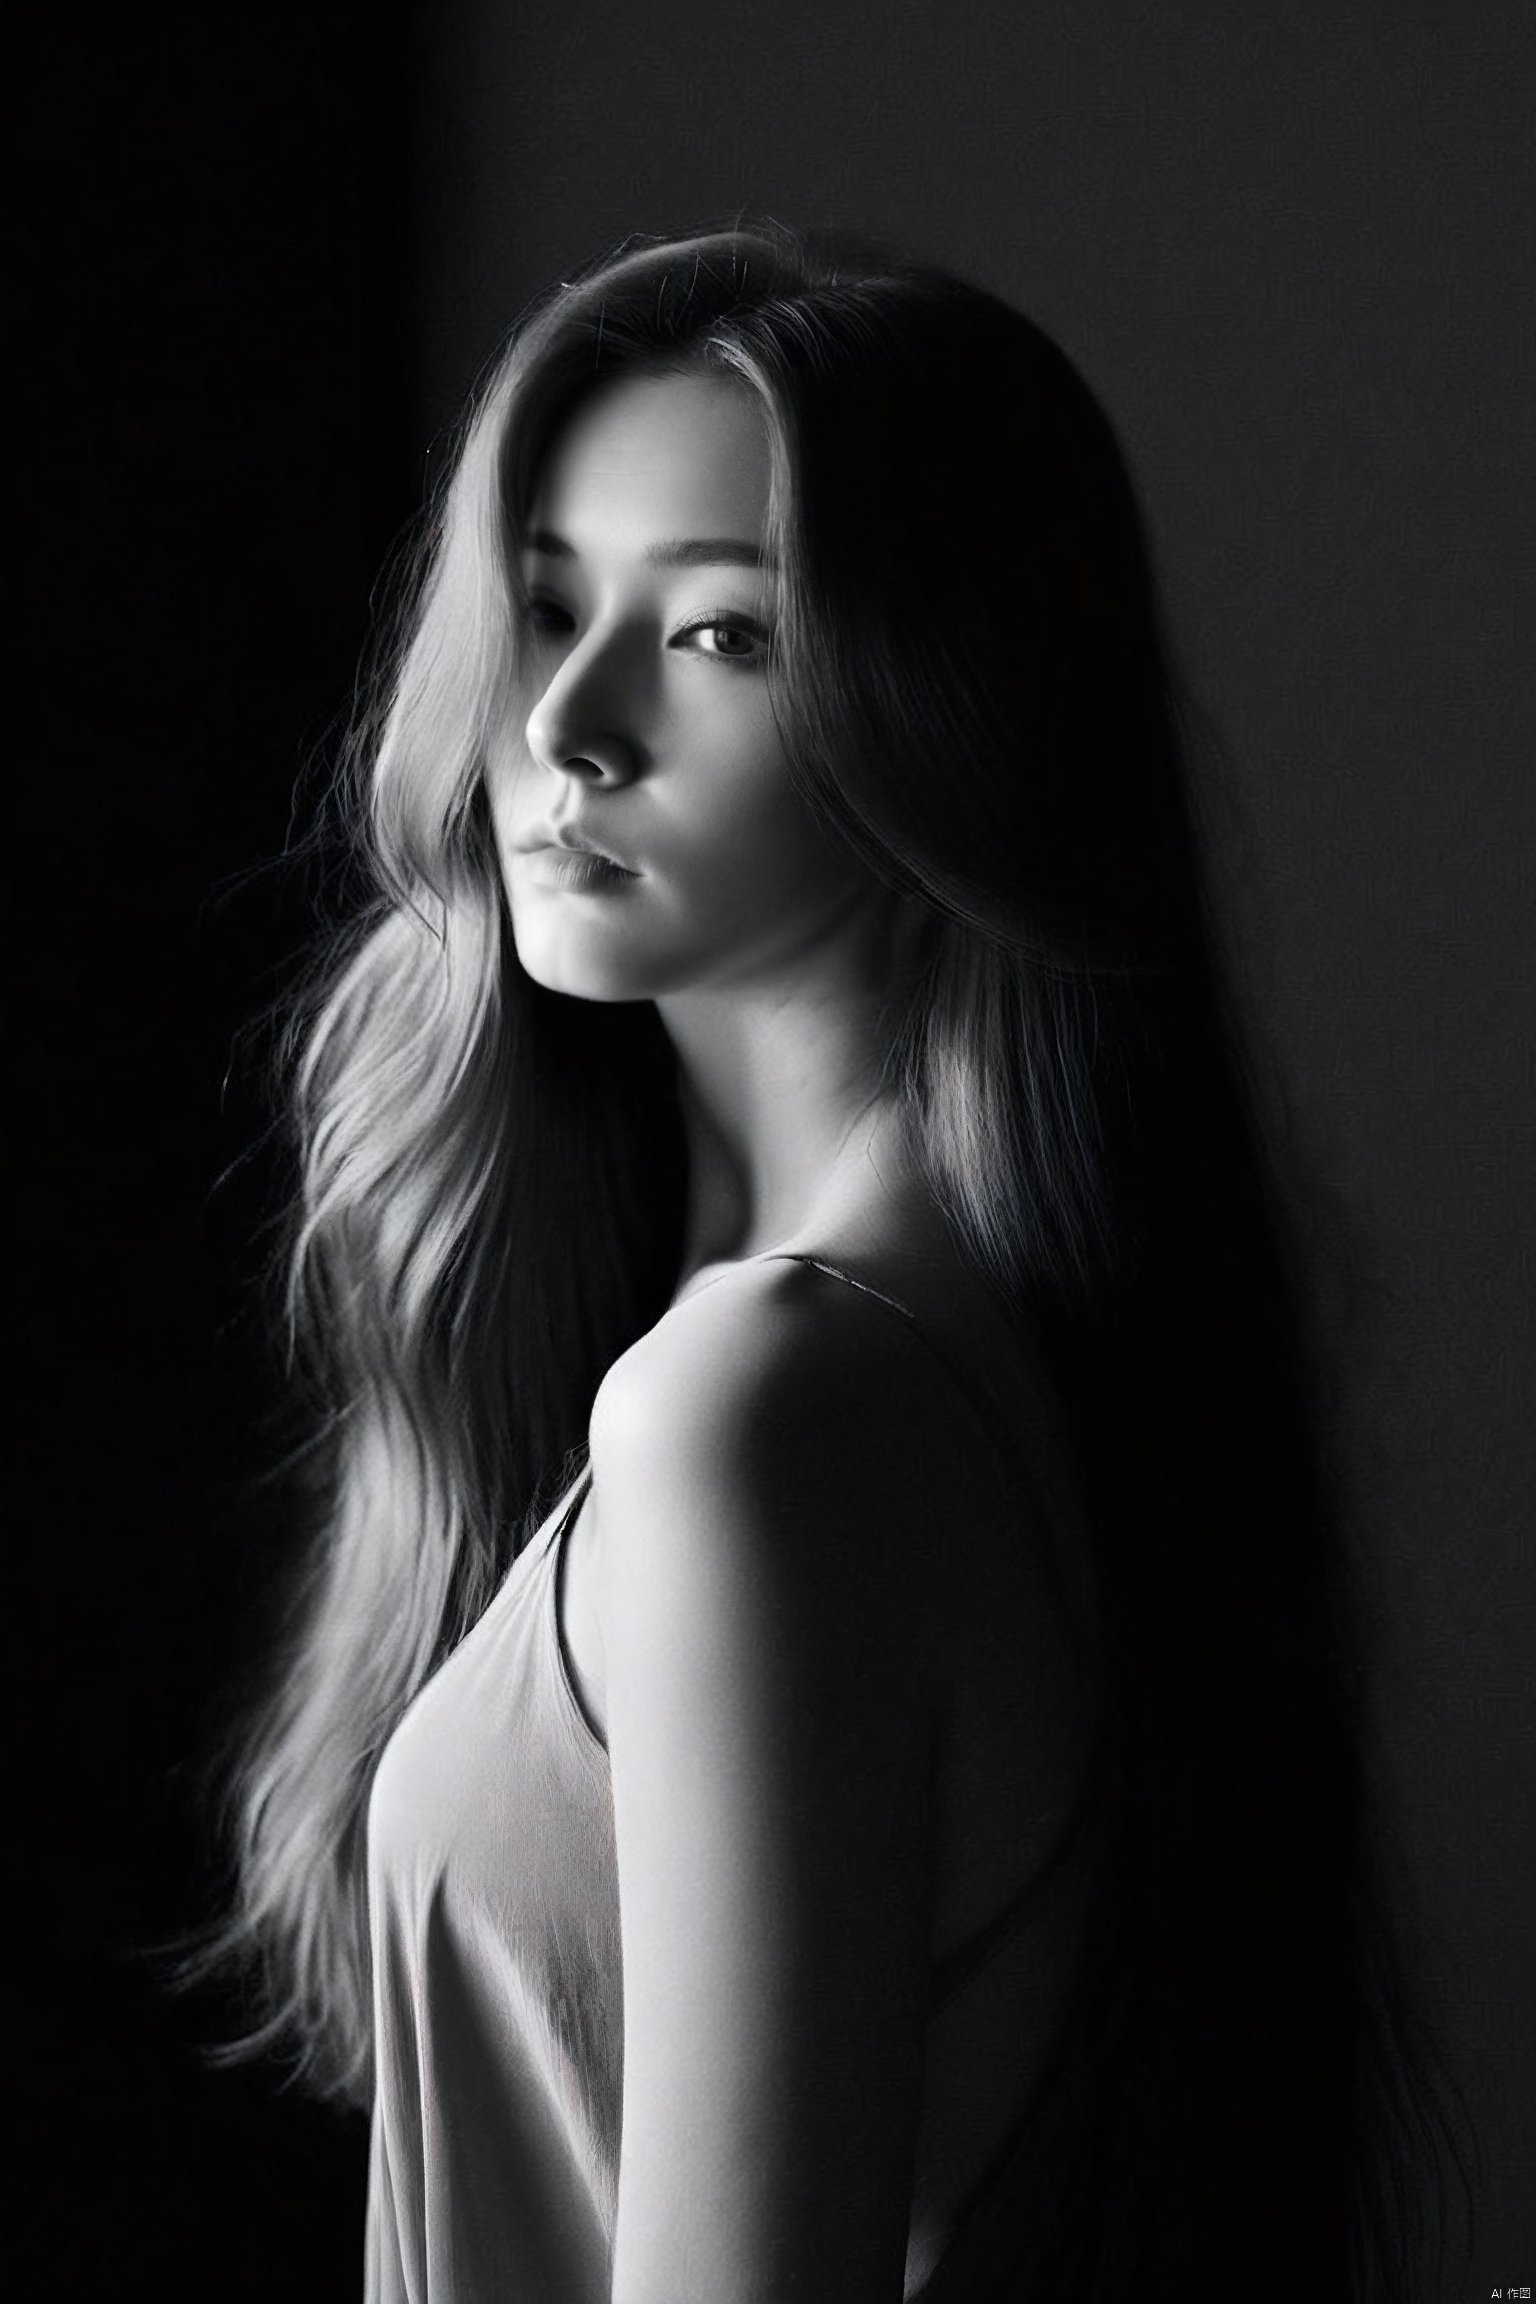  long hair,flowing hair,watching audience,(front),(studio light),upper body,soft light,black and white,dark style,summer,Full Frontal,